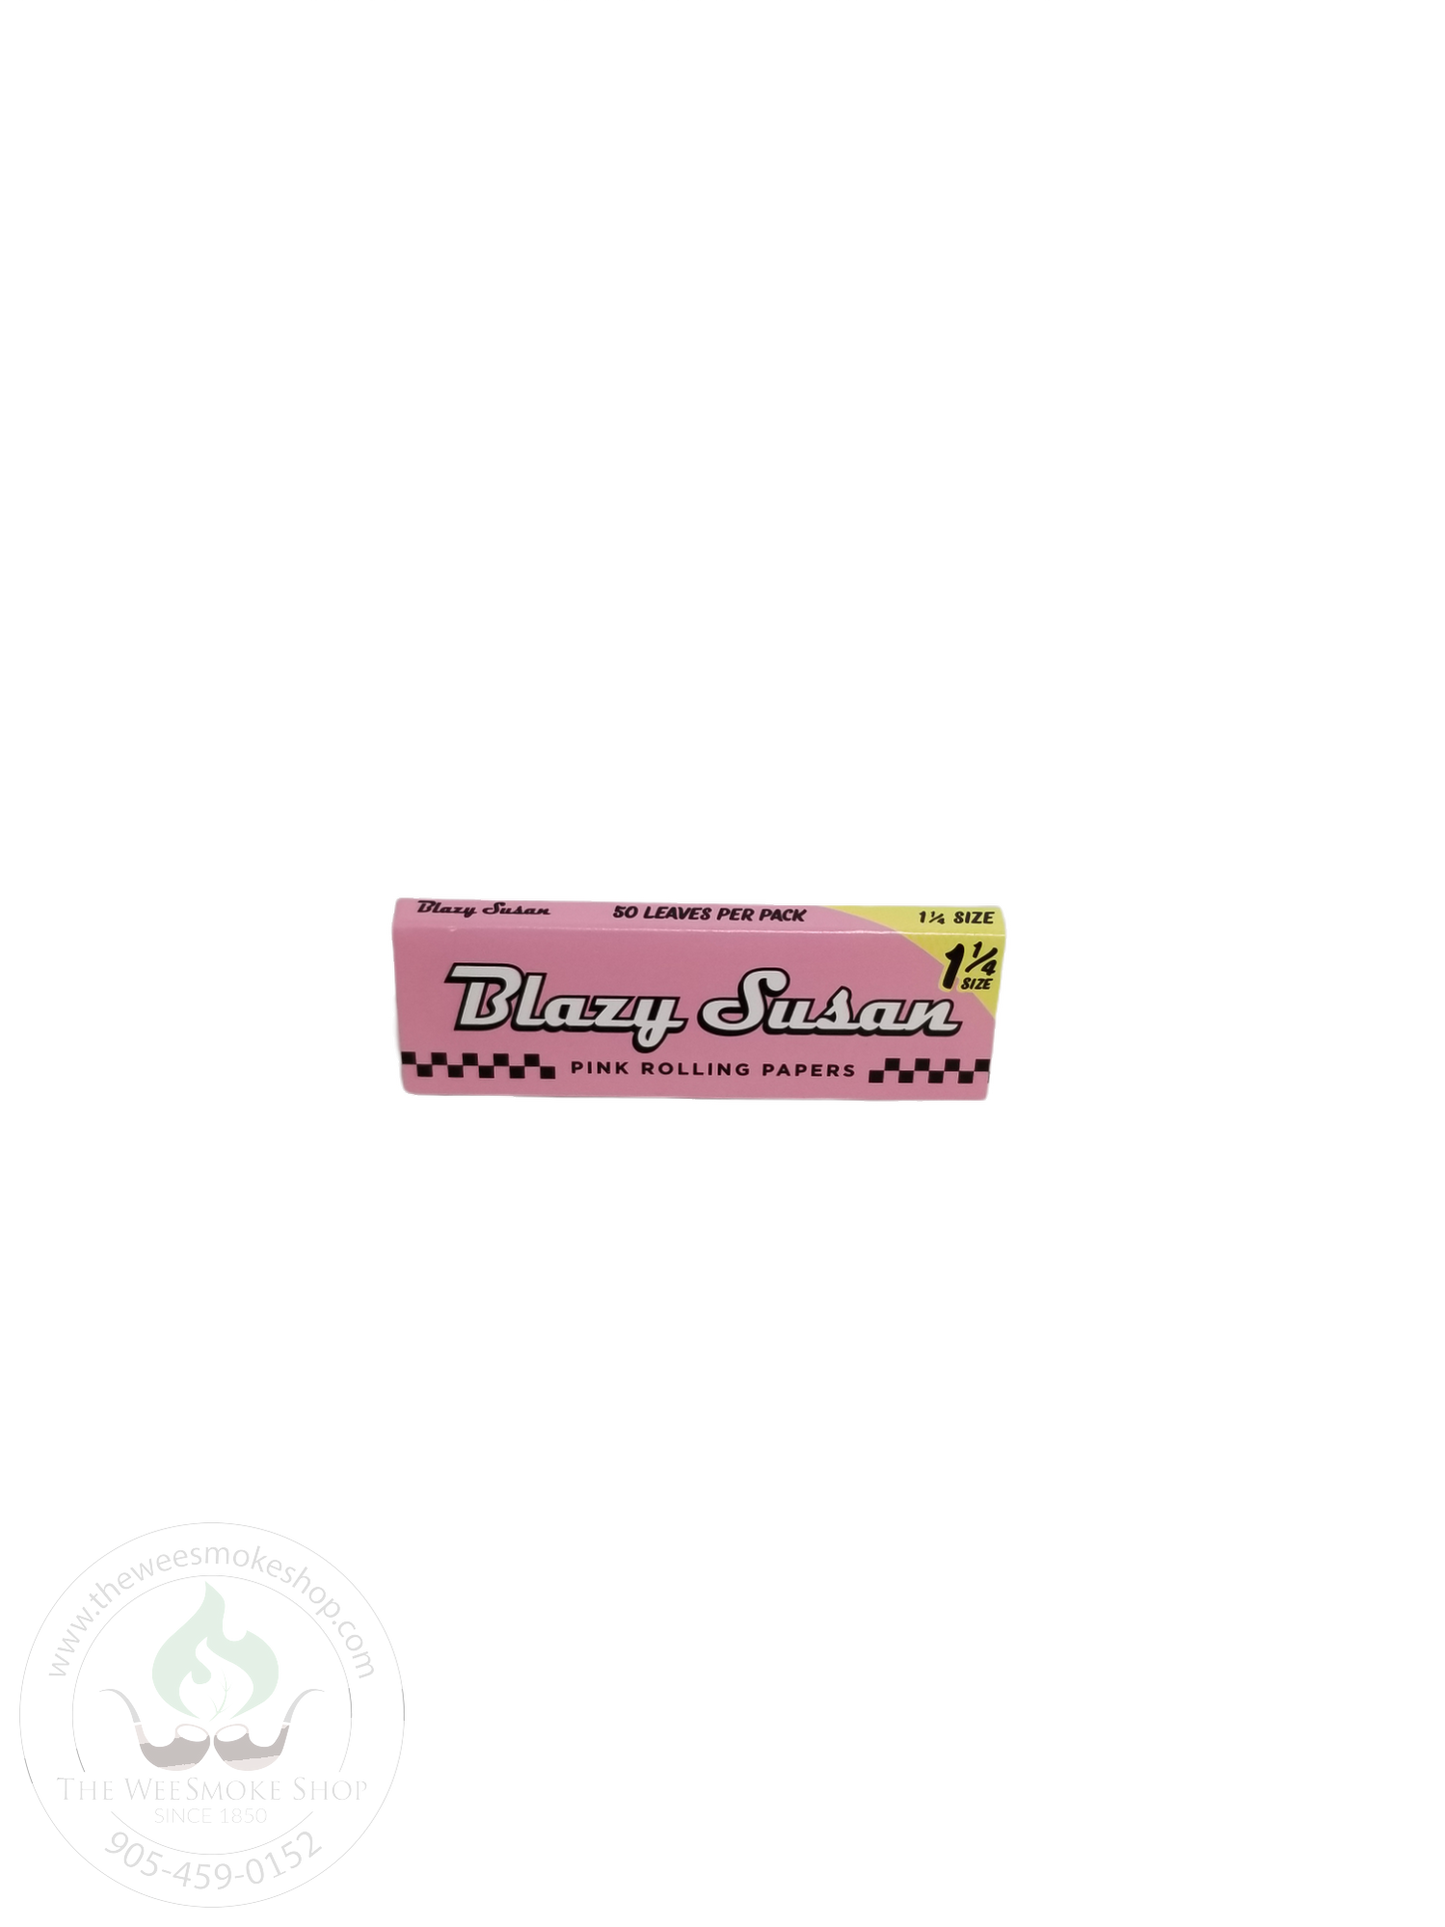 Blazy Susan Pink Rolling Papers-rolling papers. In the size 1 1/4